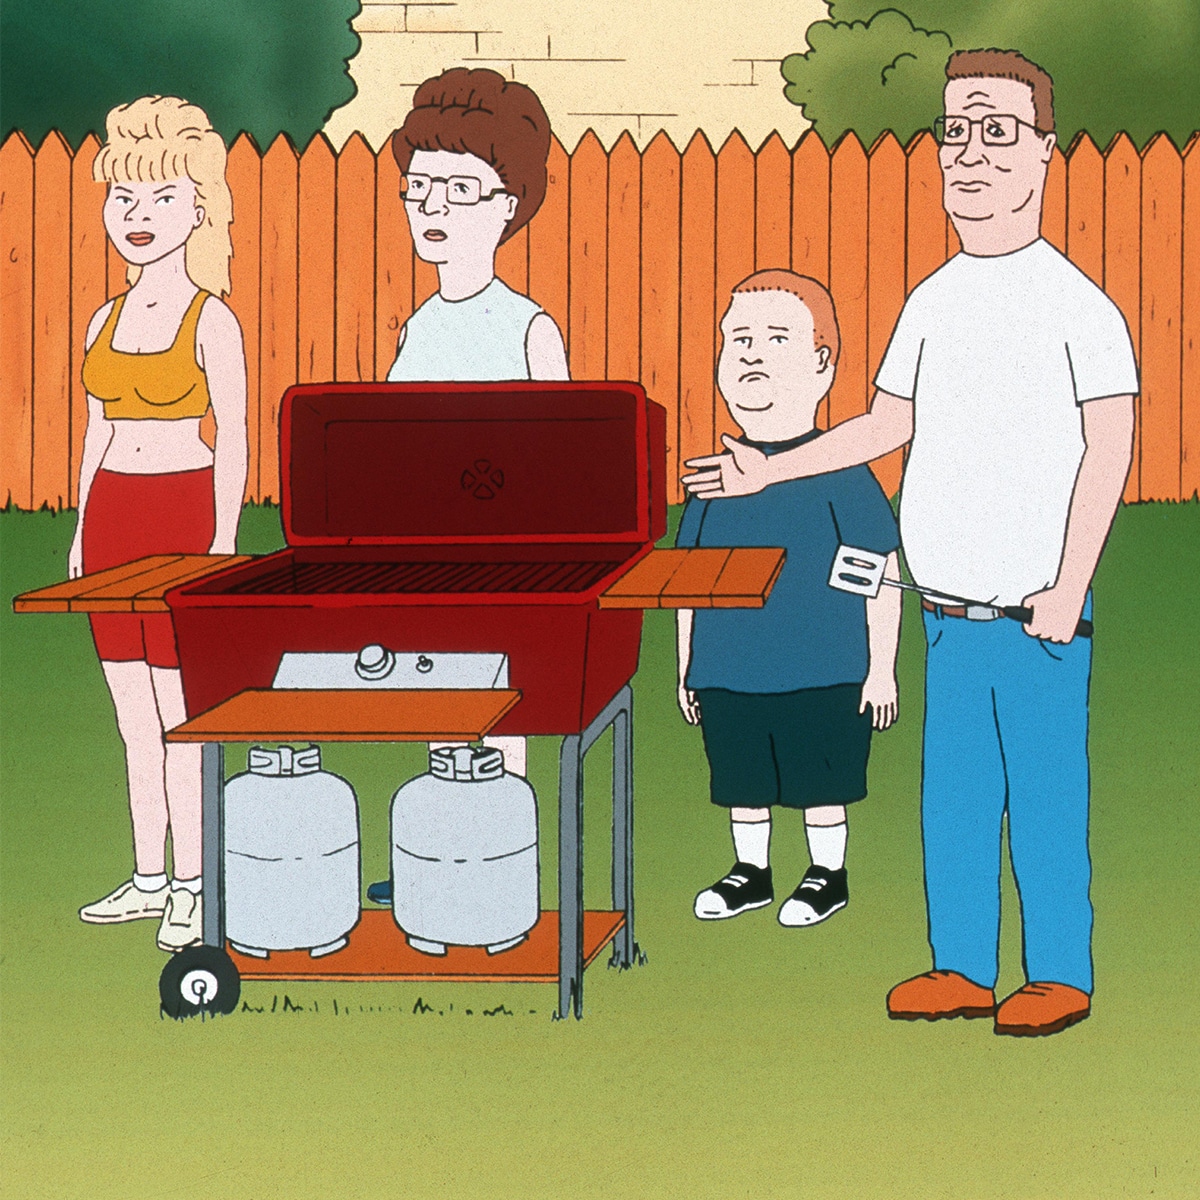 The King of the Hill Revival Is Finally Happening